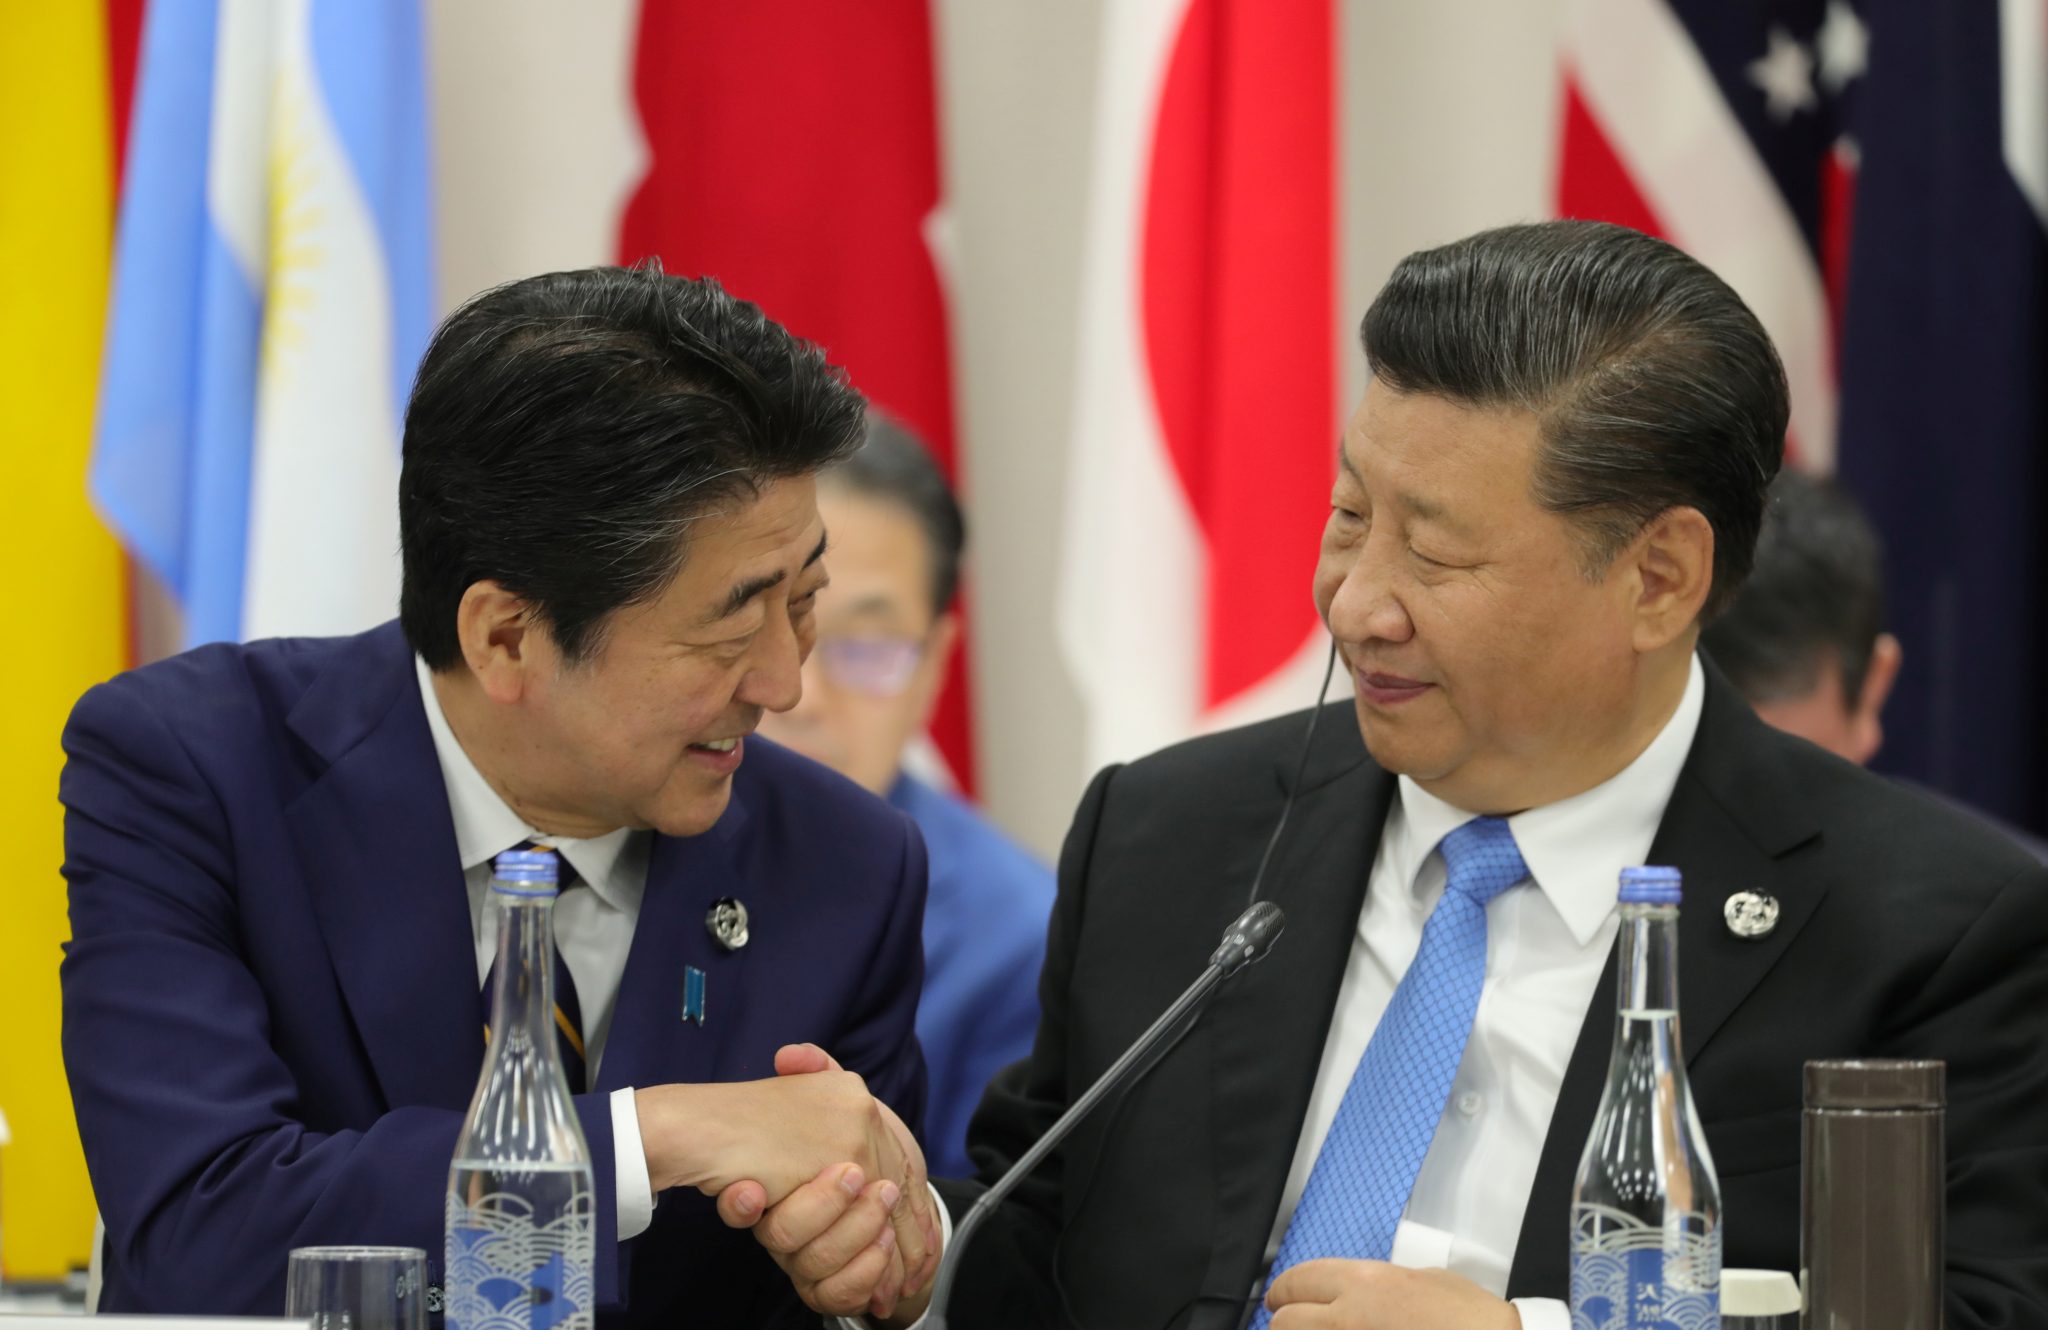 Abe’s legacy on Japan–China relations